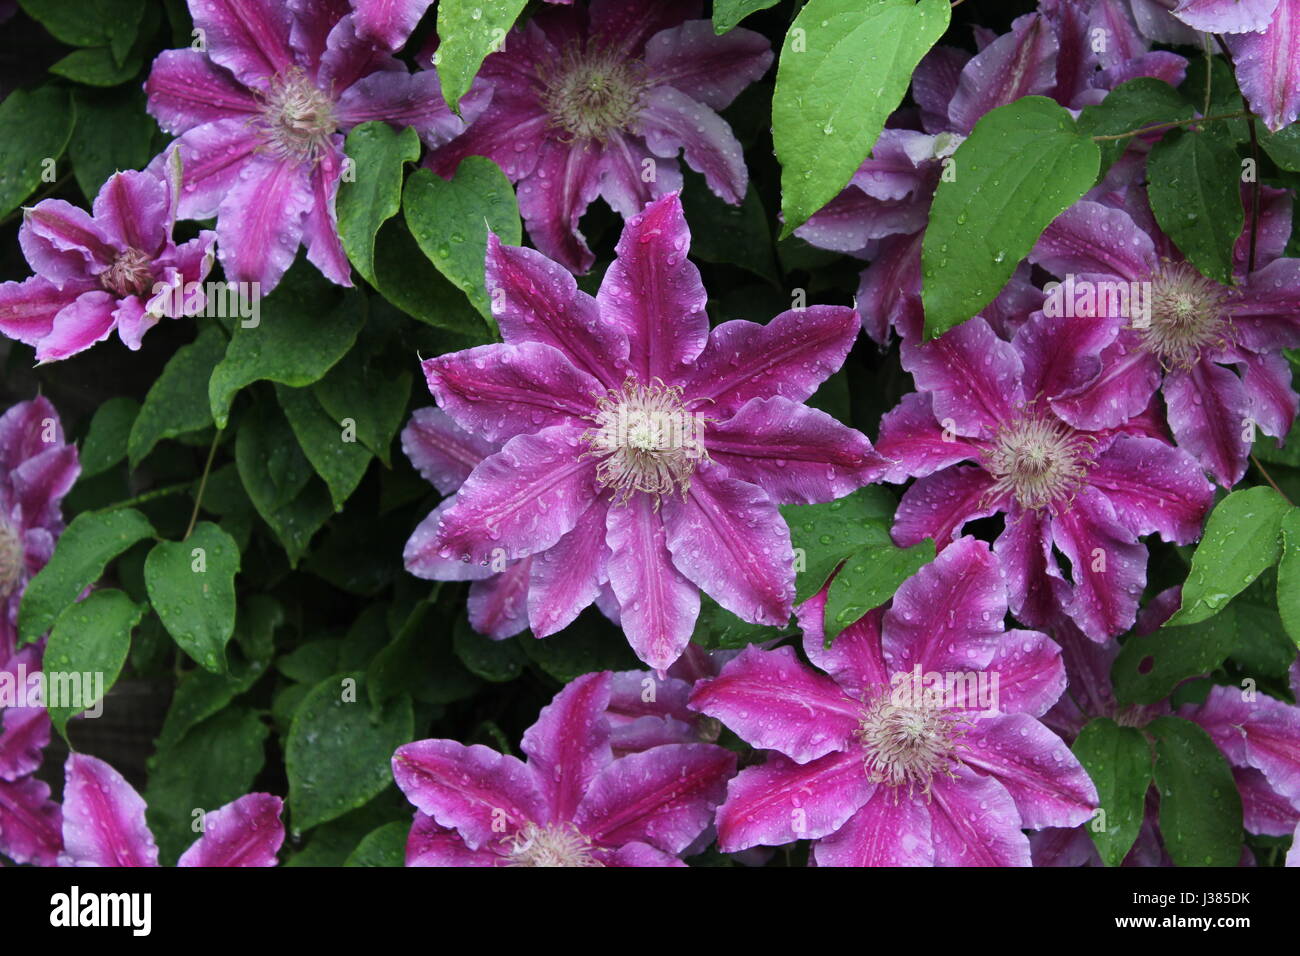 Clematis 'Dr Ruppel' climbing plant Stock Photo